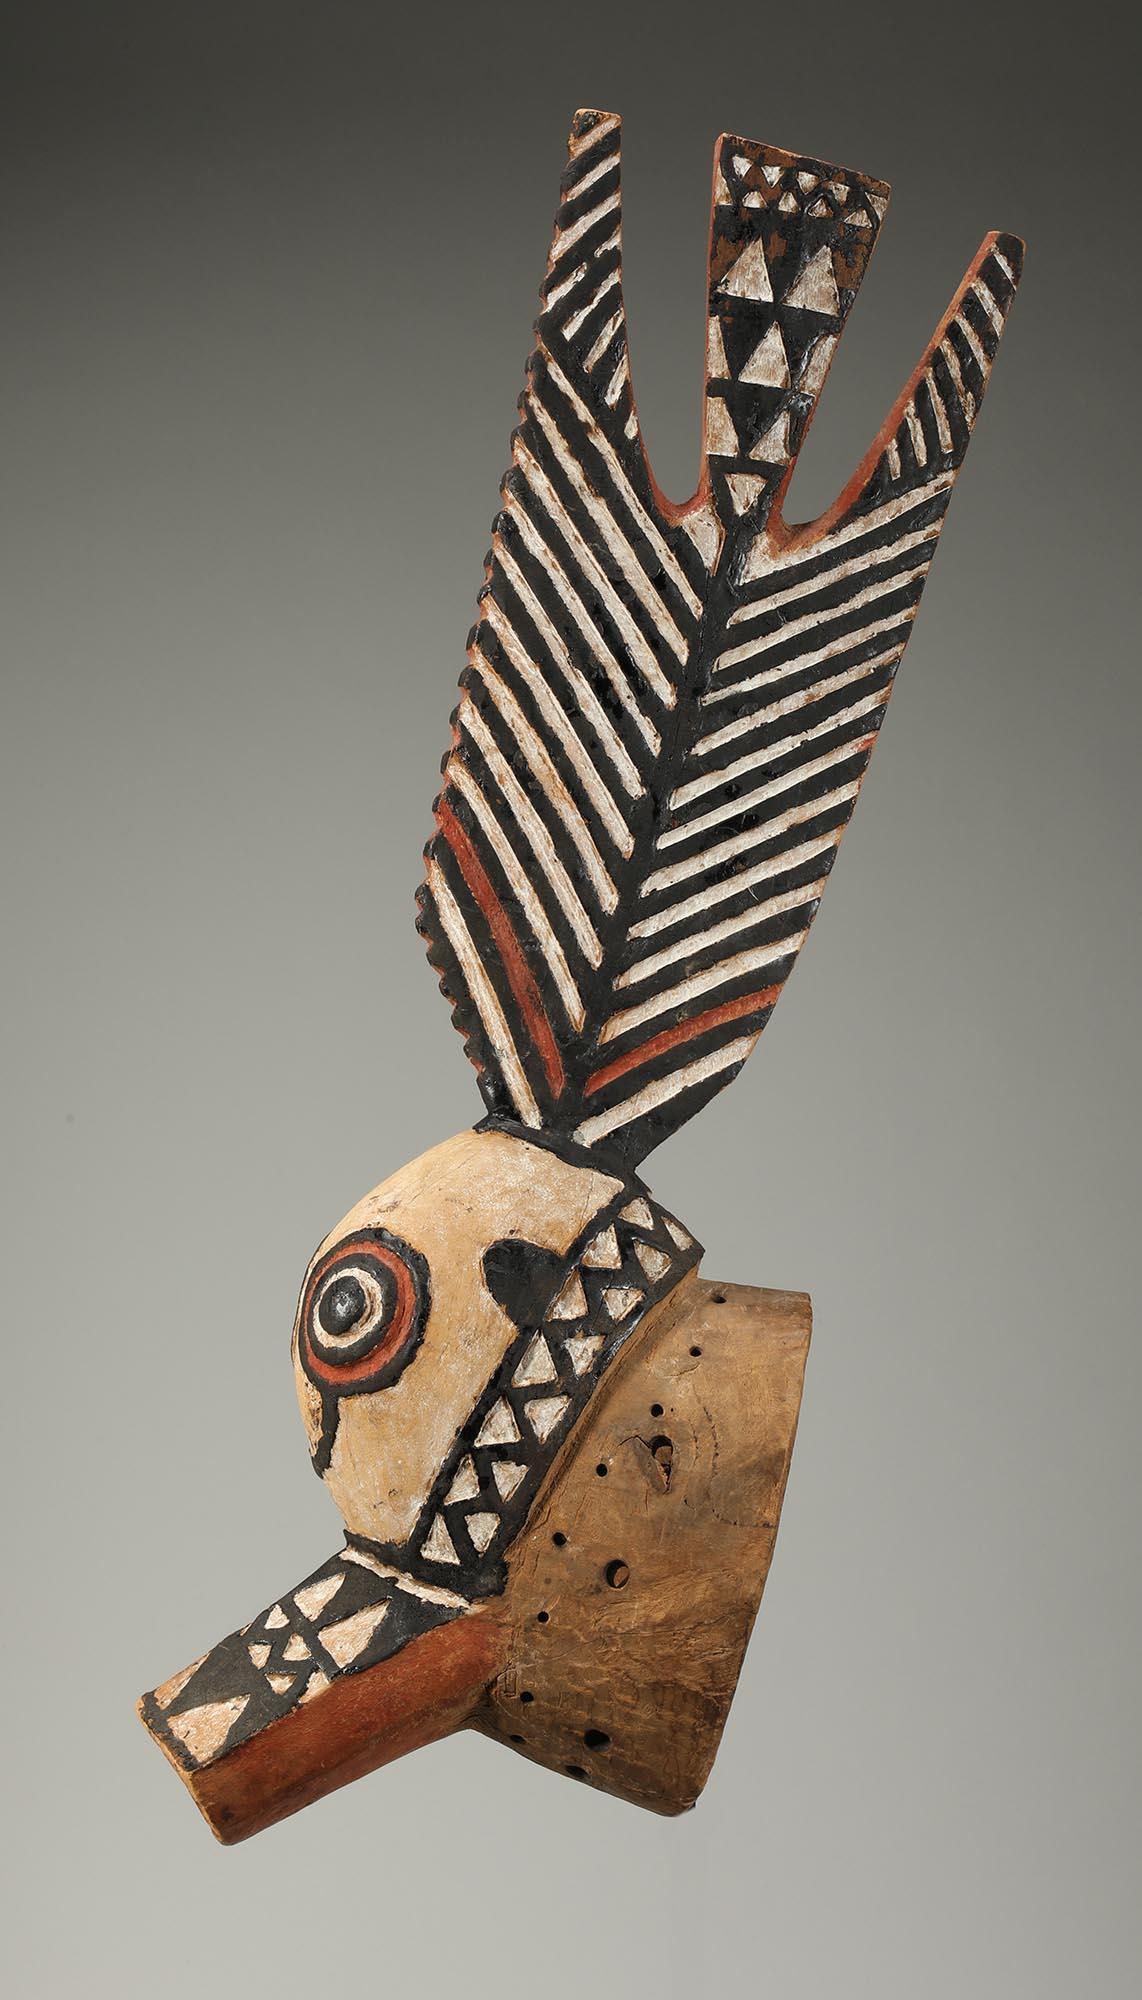 An important Bobo zoomorphic mask with fish and bird elements, added color for a dramatic impact. Includes a custom metal mount to hang on the wall.
Ex- Henri Kamer, NY, published as Bwa in Haute-Volta, 1973, # 13. original raffia costume now